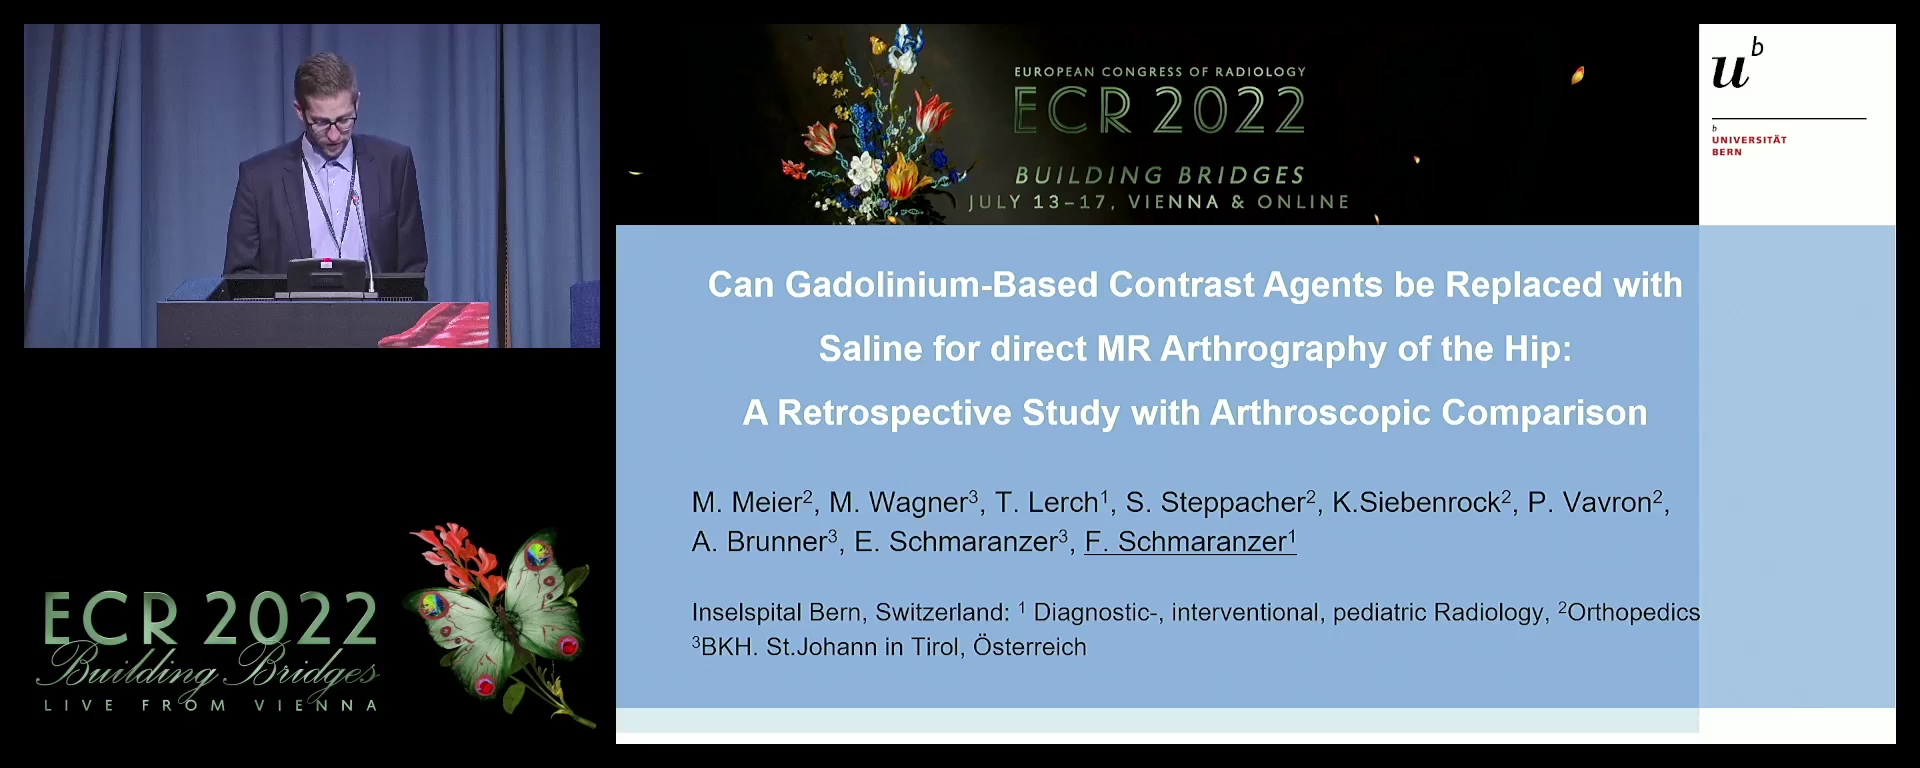 Can gadolinium contrast agents be replaced with saline for direct MR arthrography of the hip? A retrospective study with arthroscopic comparison - Florian Schmaranzer, Bern / CH